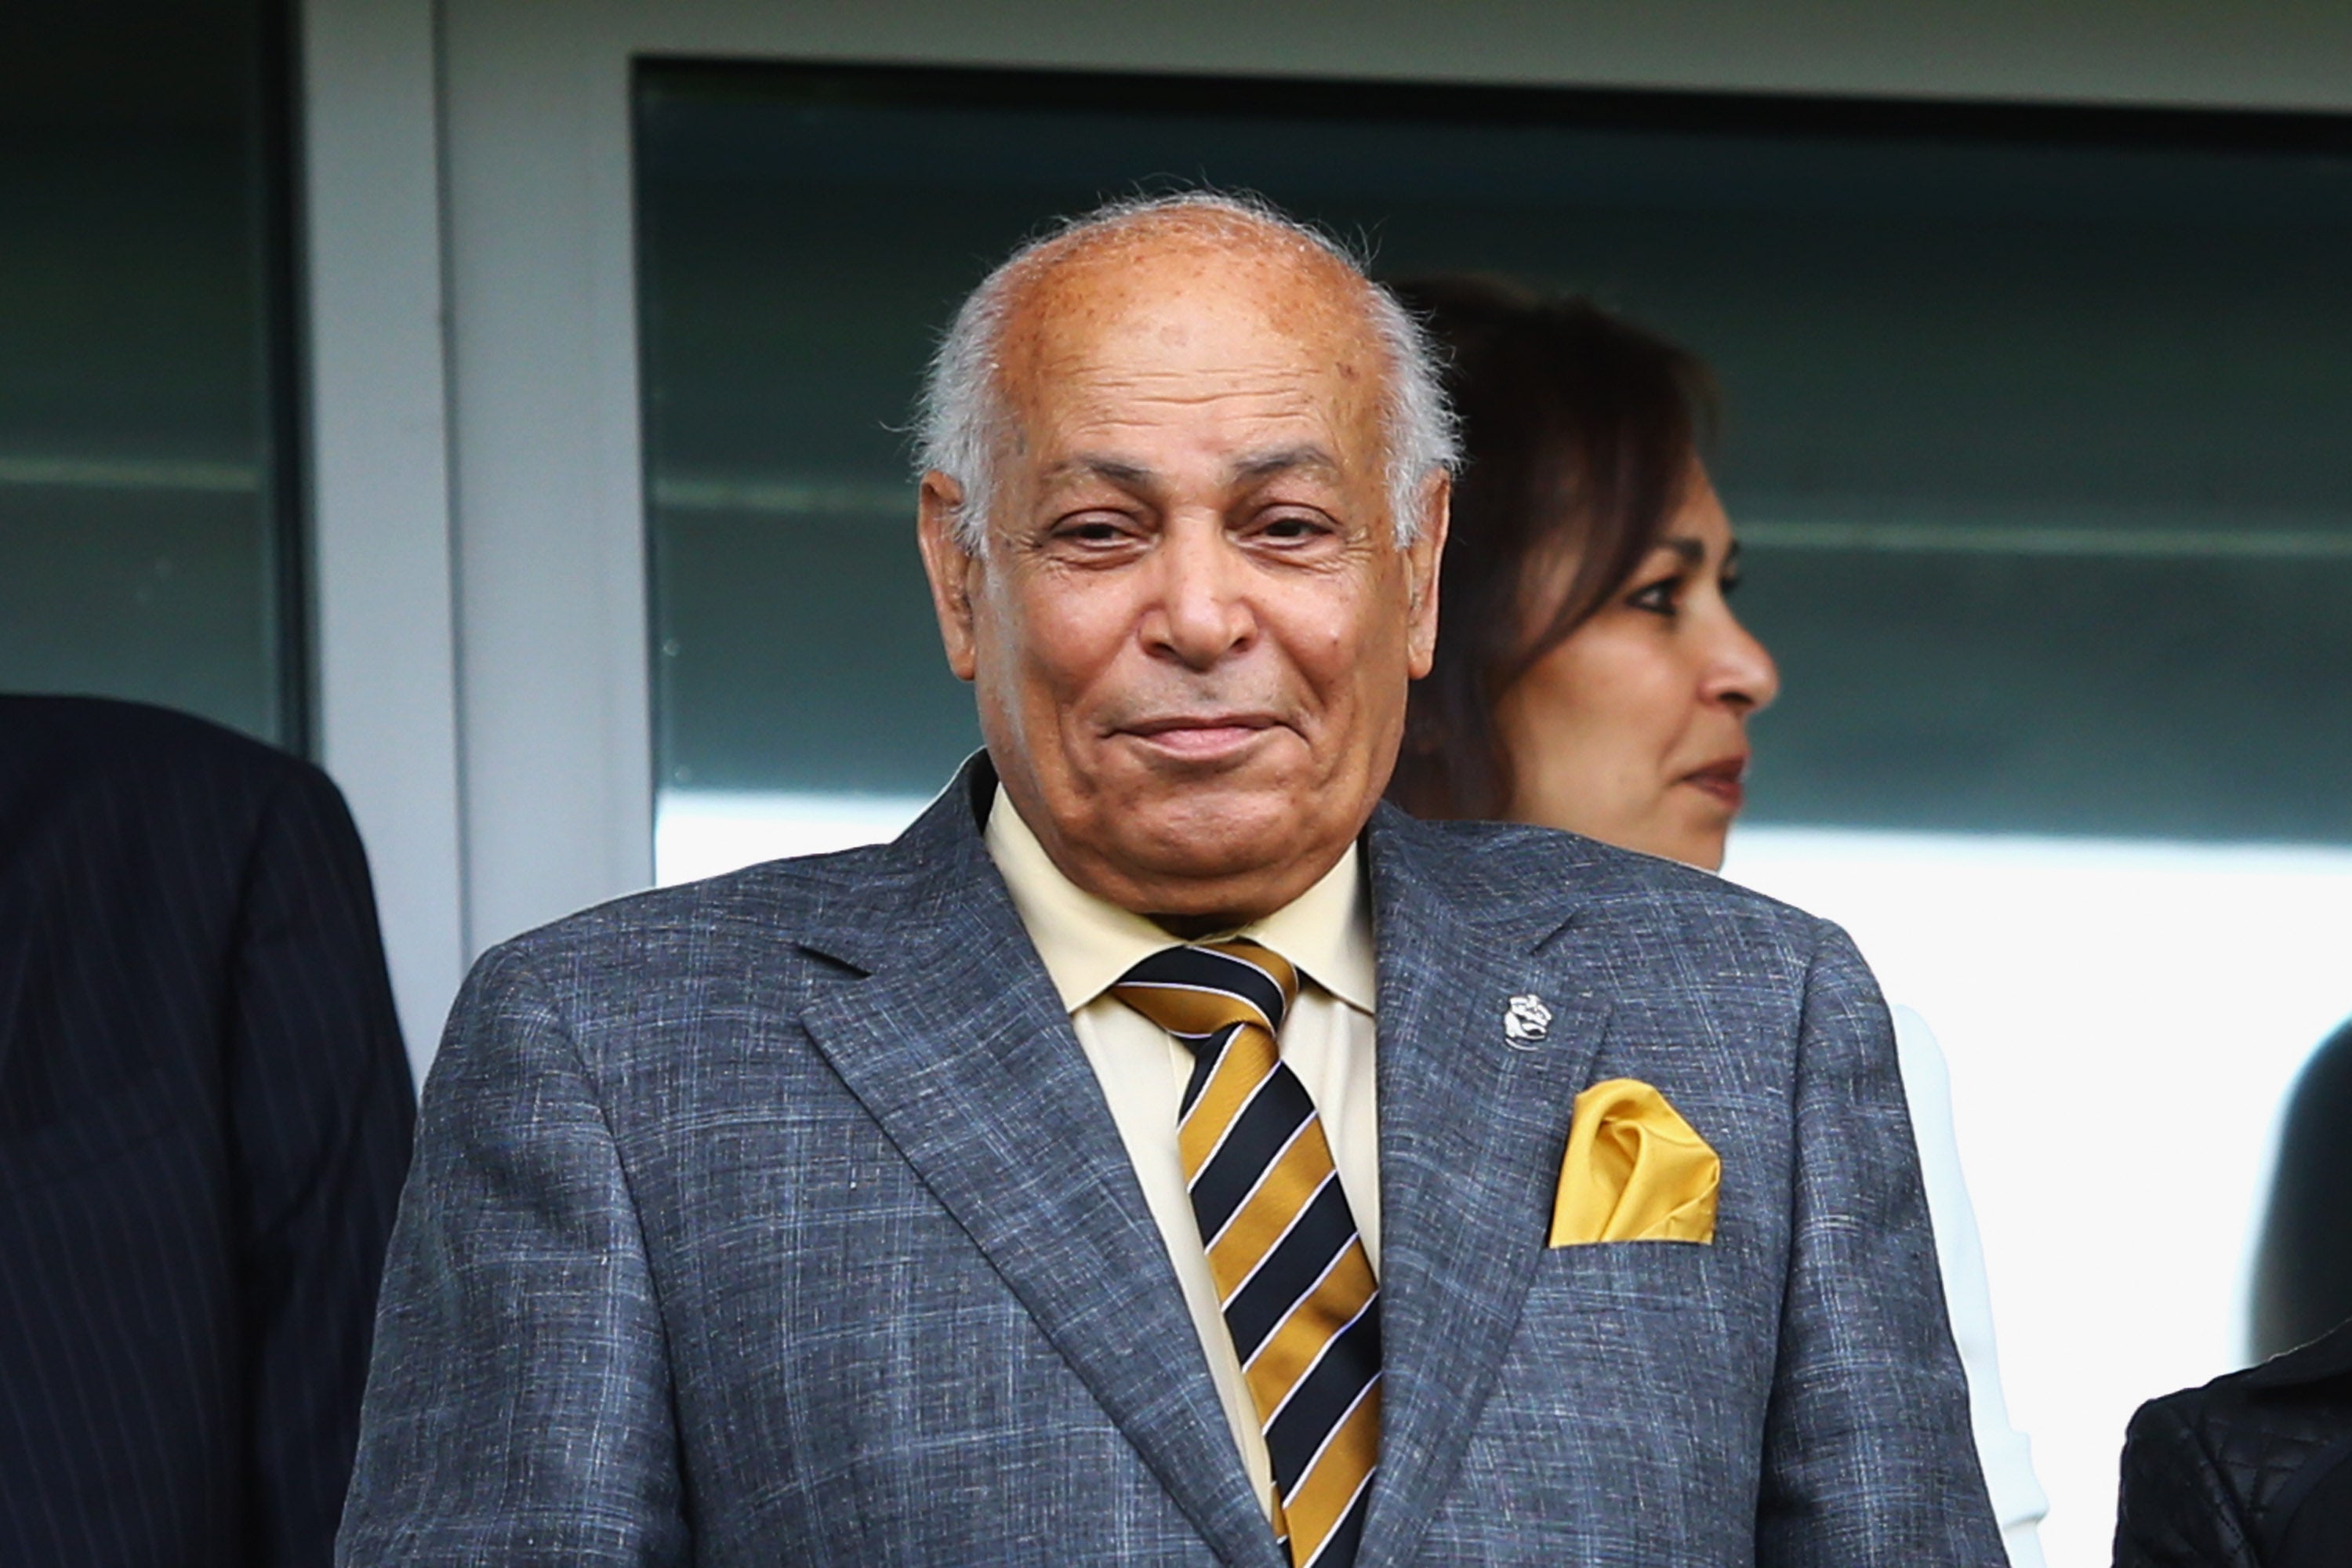 Dr. Assem Allam, the Hull City chairman who was widely criticised for his rejected rebrand plans, looked happy from the stands.